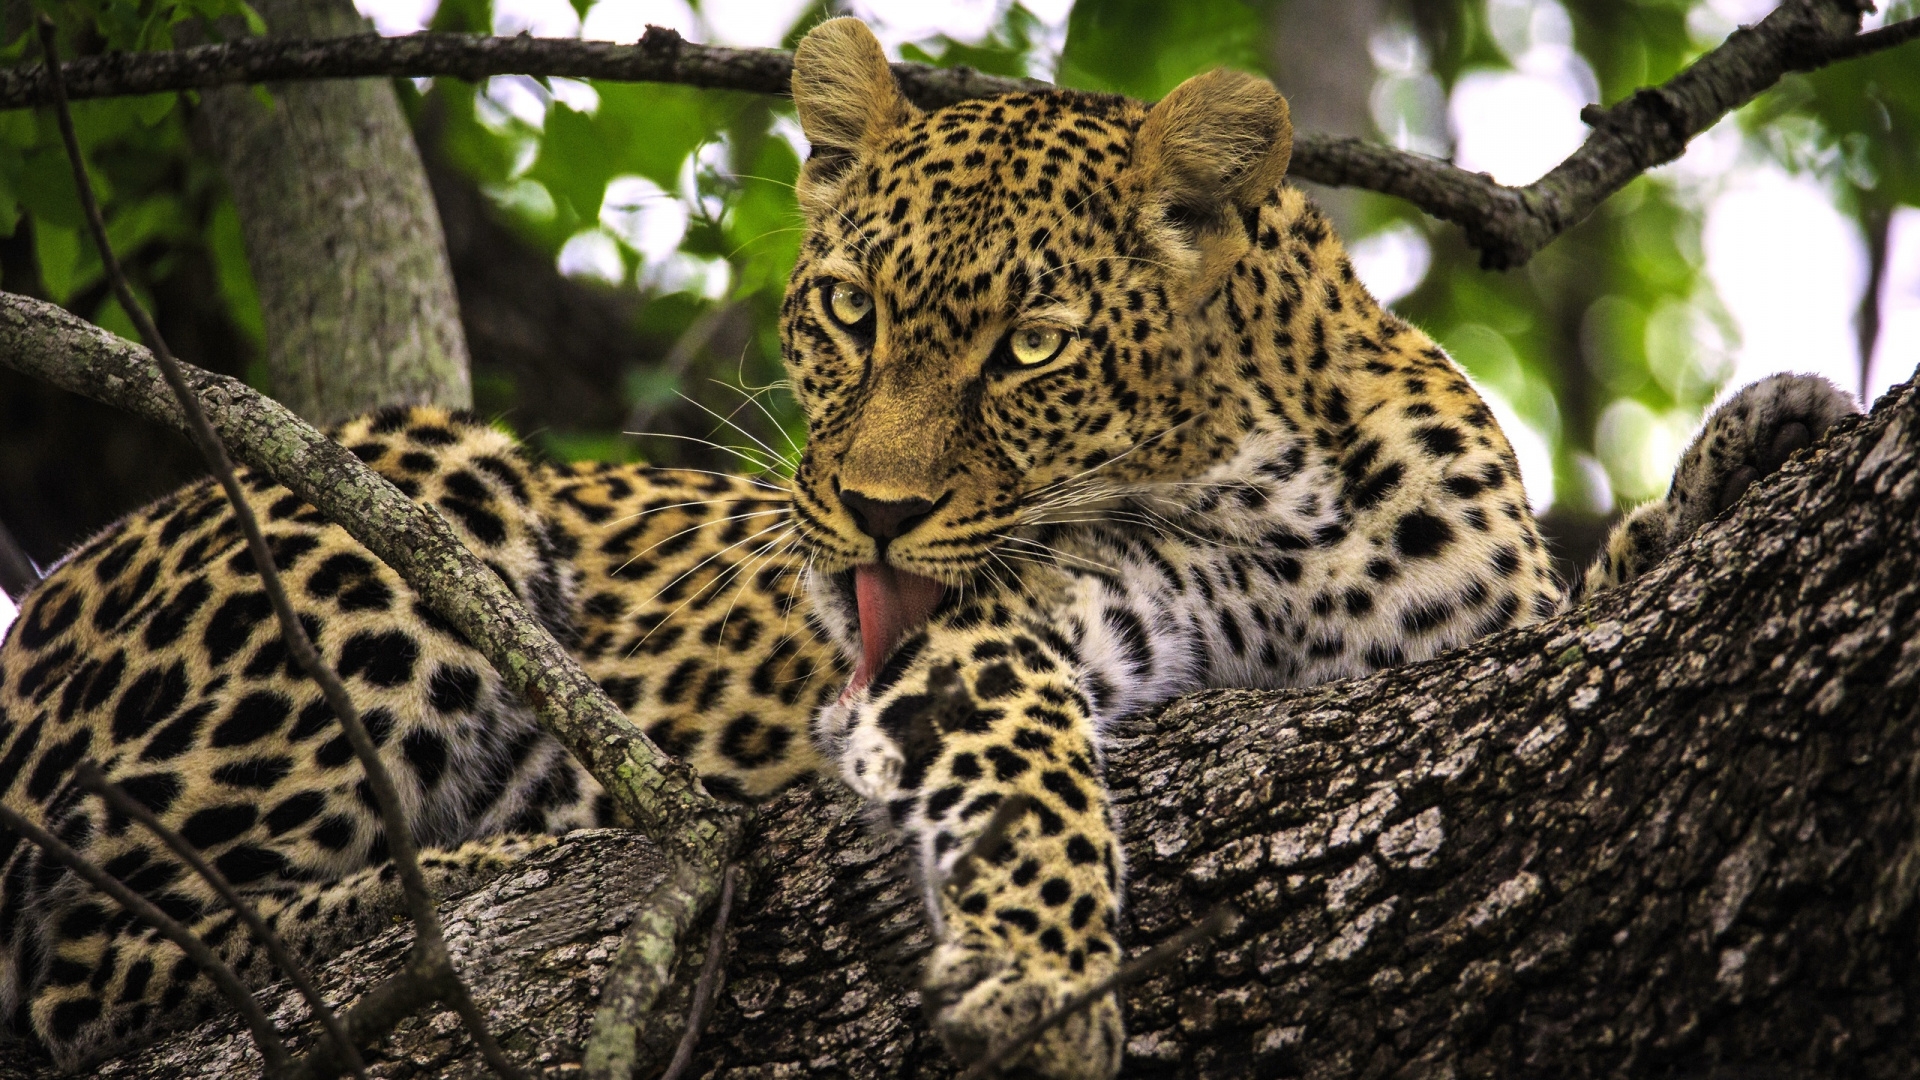 Leopard on Tree Branch During Daytime. Wallpaper in 1920x1080 Resolution